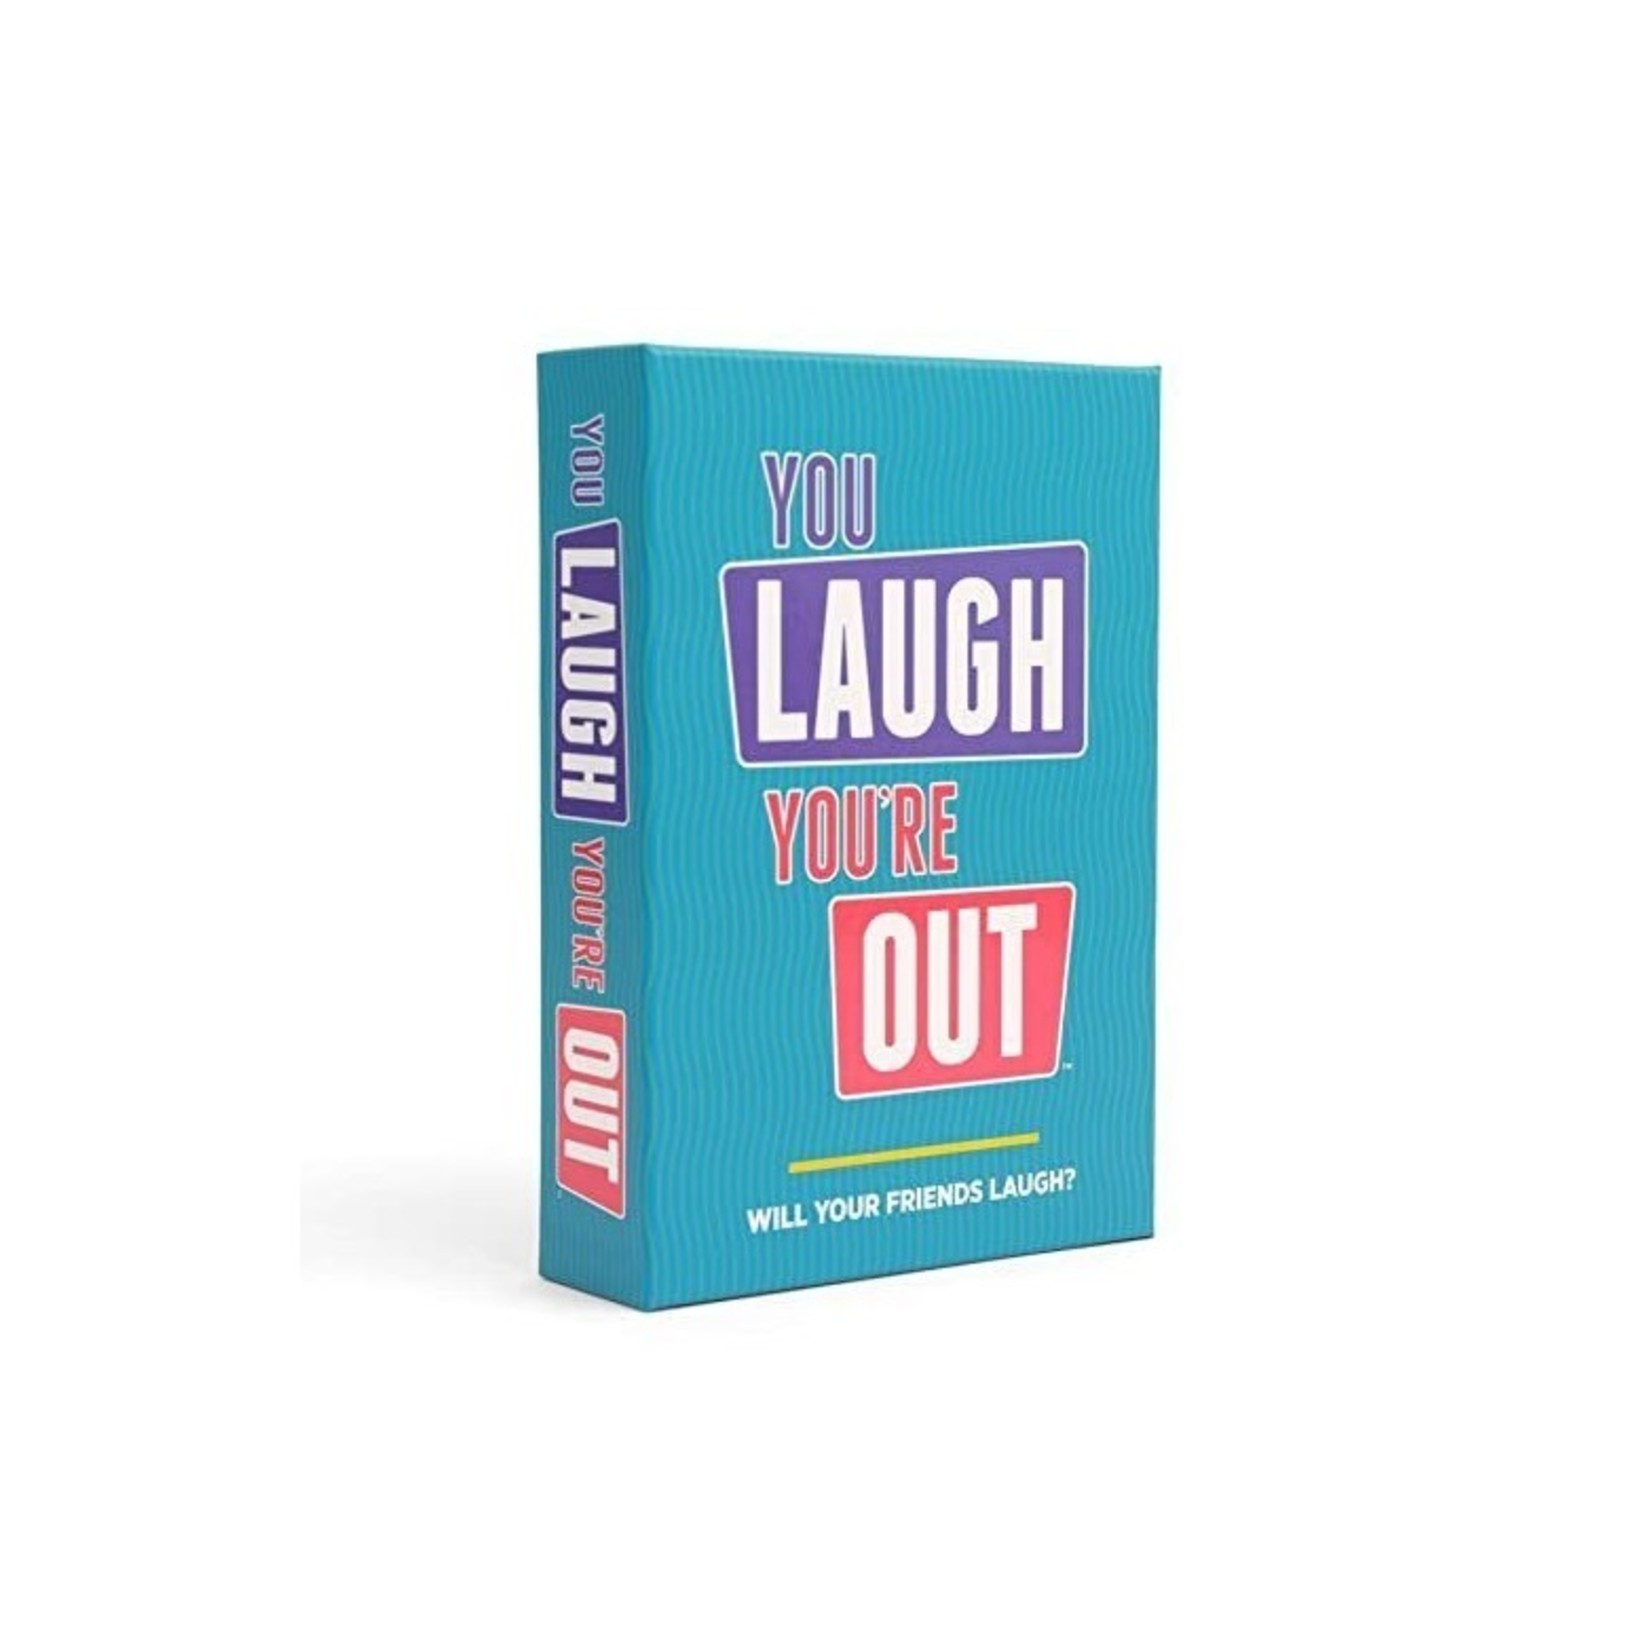 You Laugh You're Out (English)